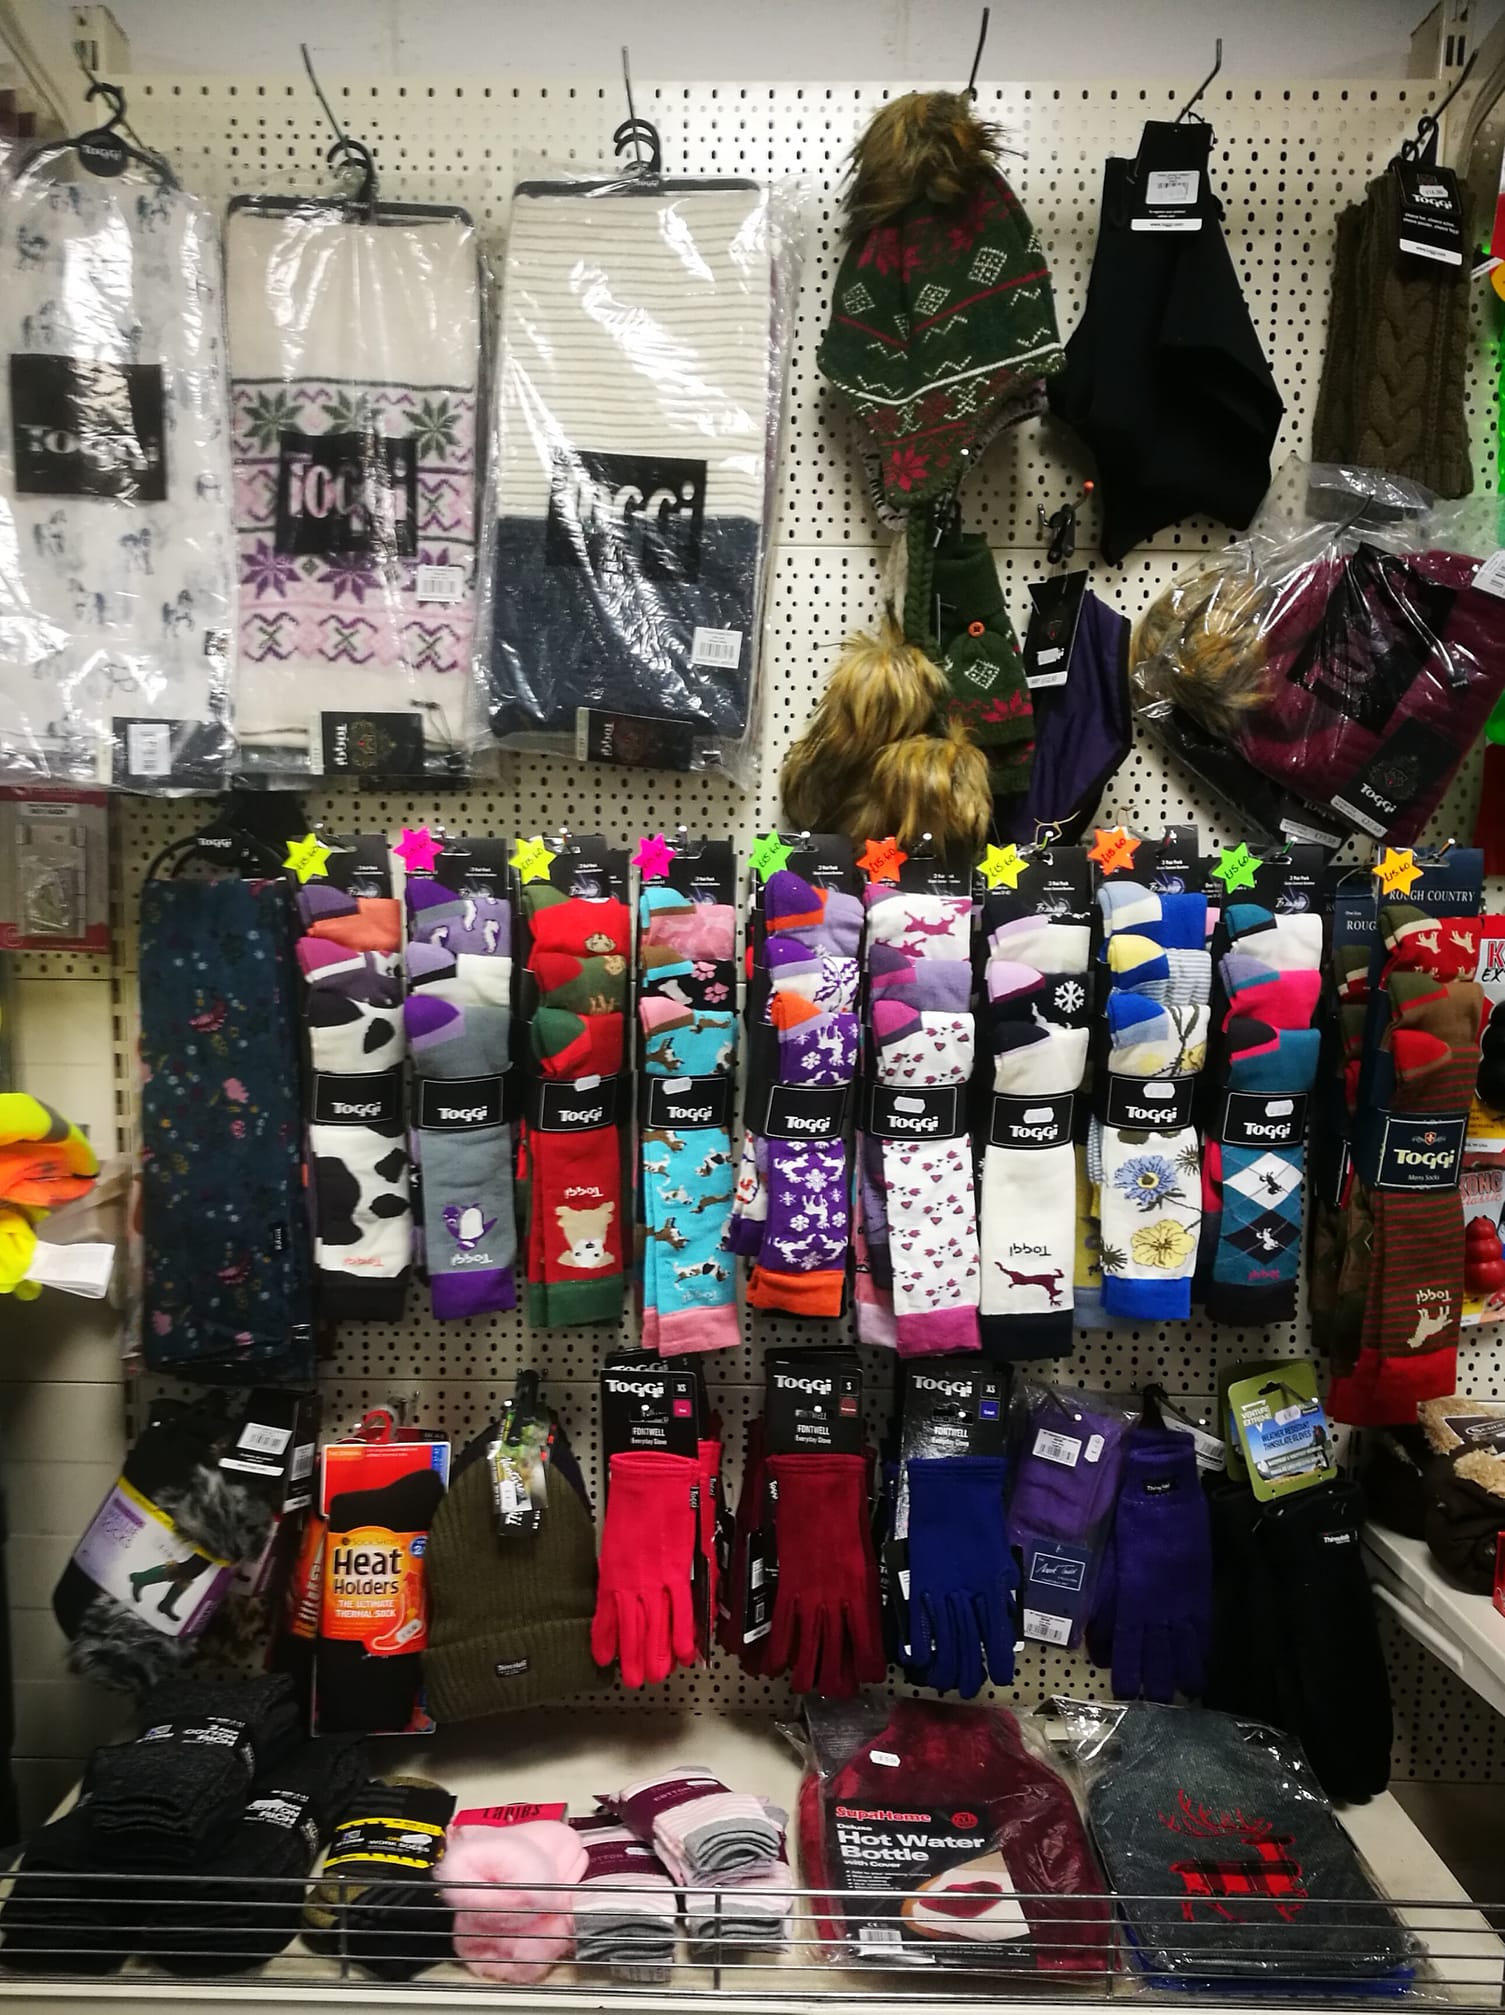 a display of socks and hats including one that says ' toggi ' on it